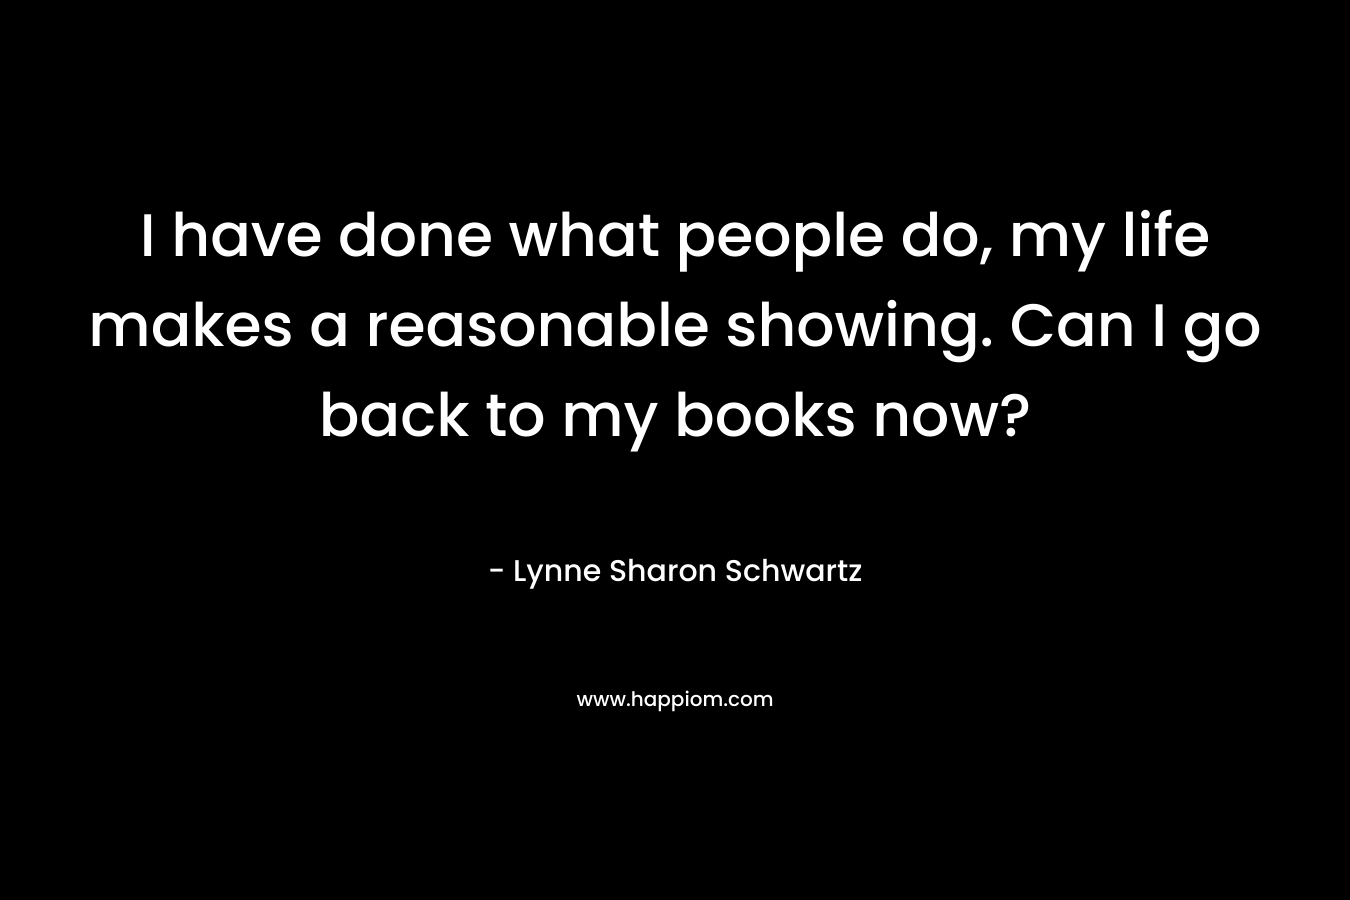 I have done what people do, my life makes a reasonable showing. Can I go back to my books now?